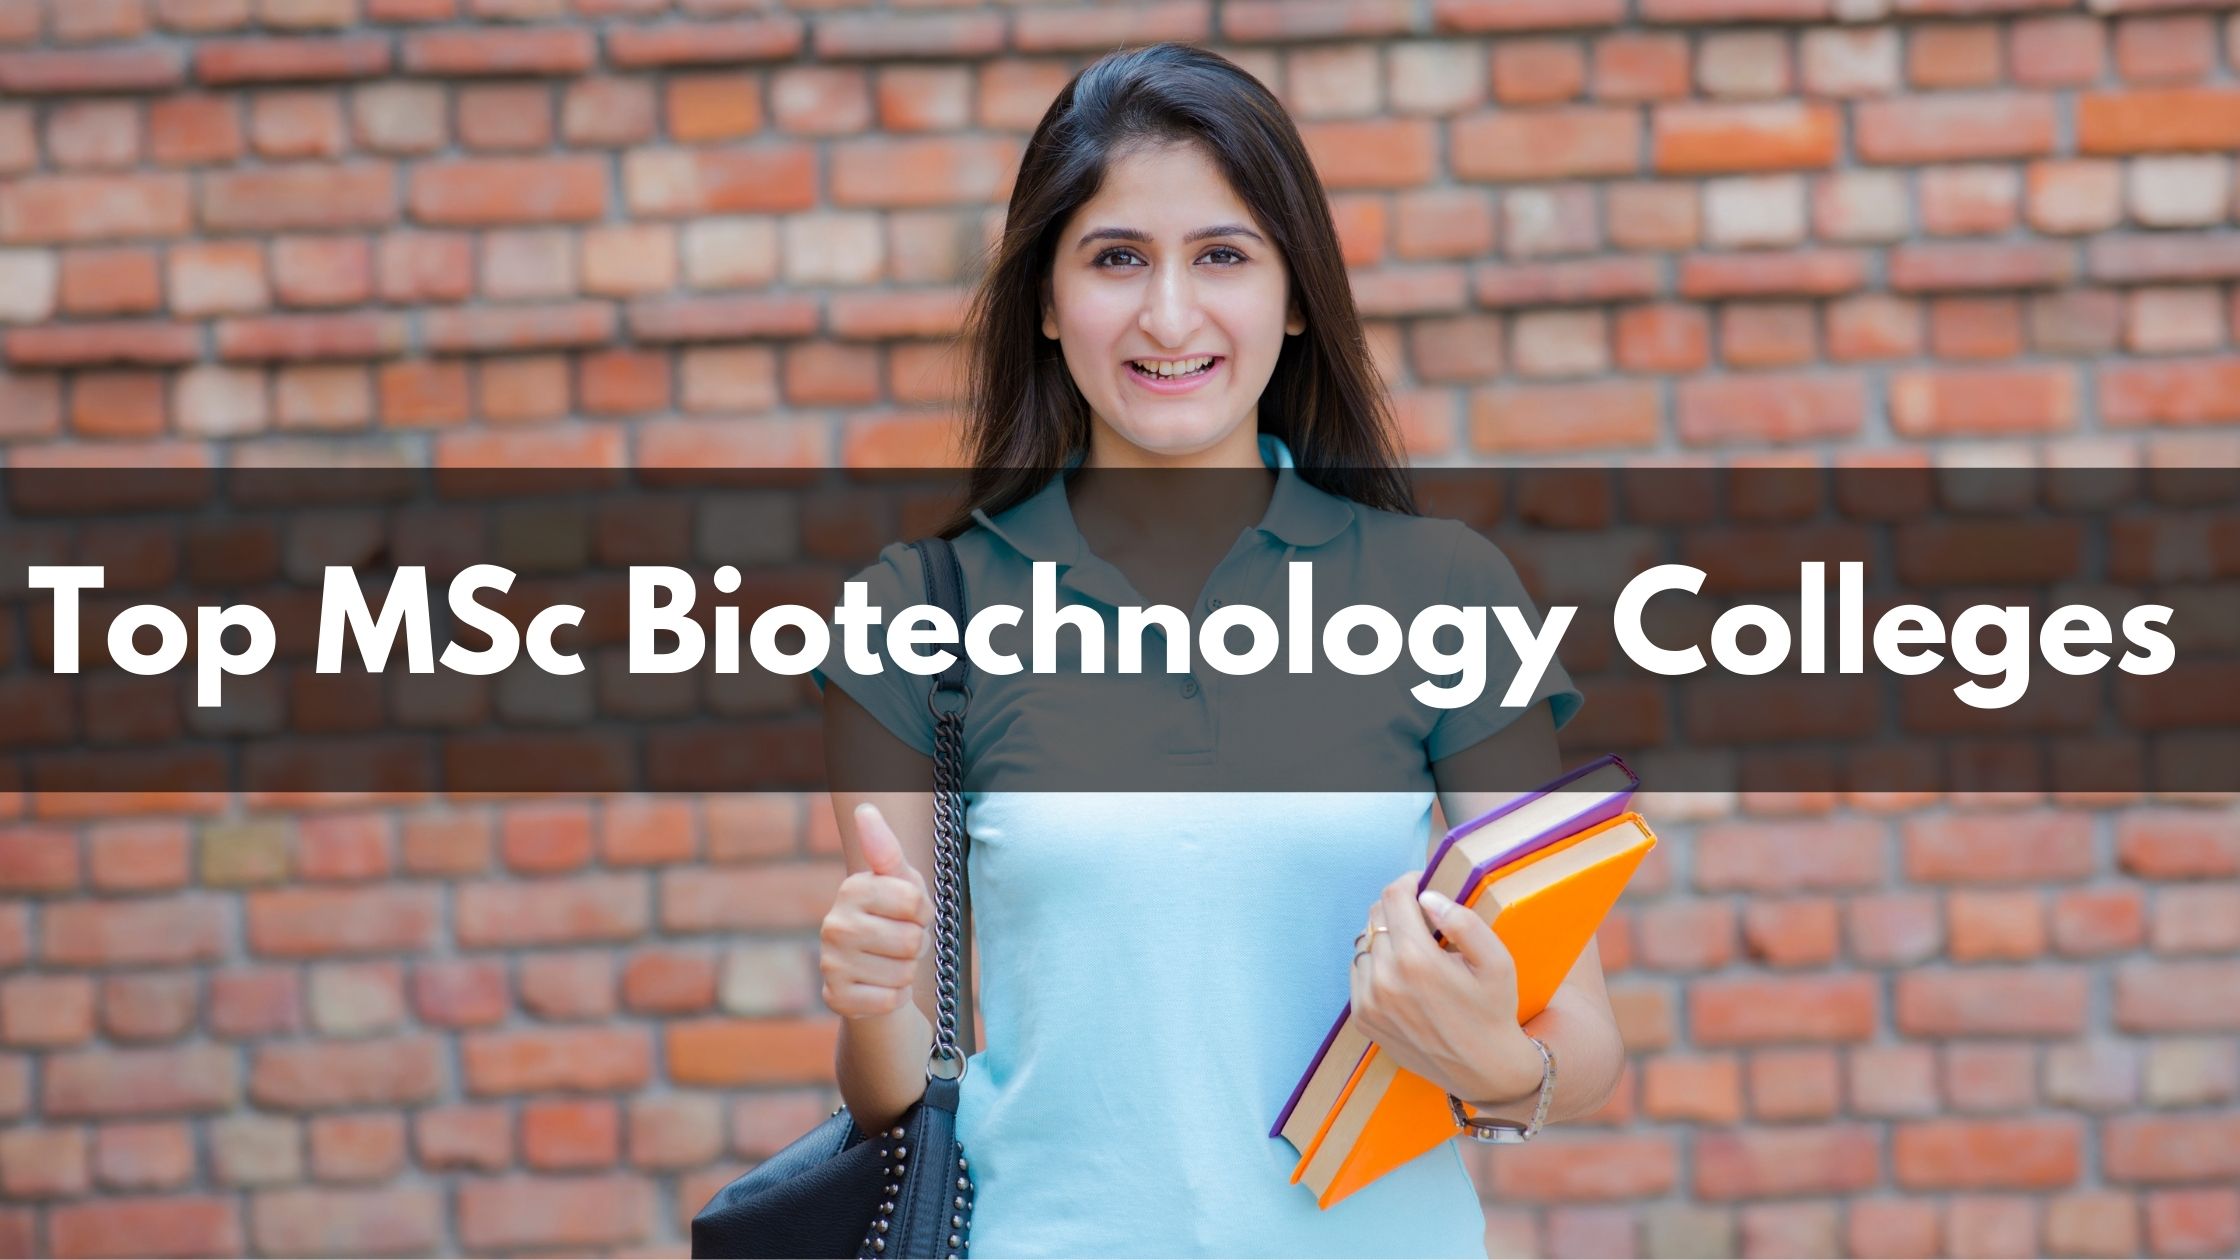 MSc Biotechnology Colleges